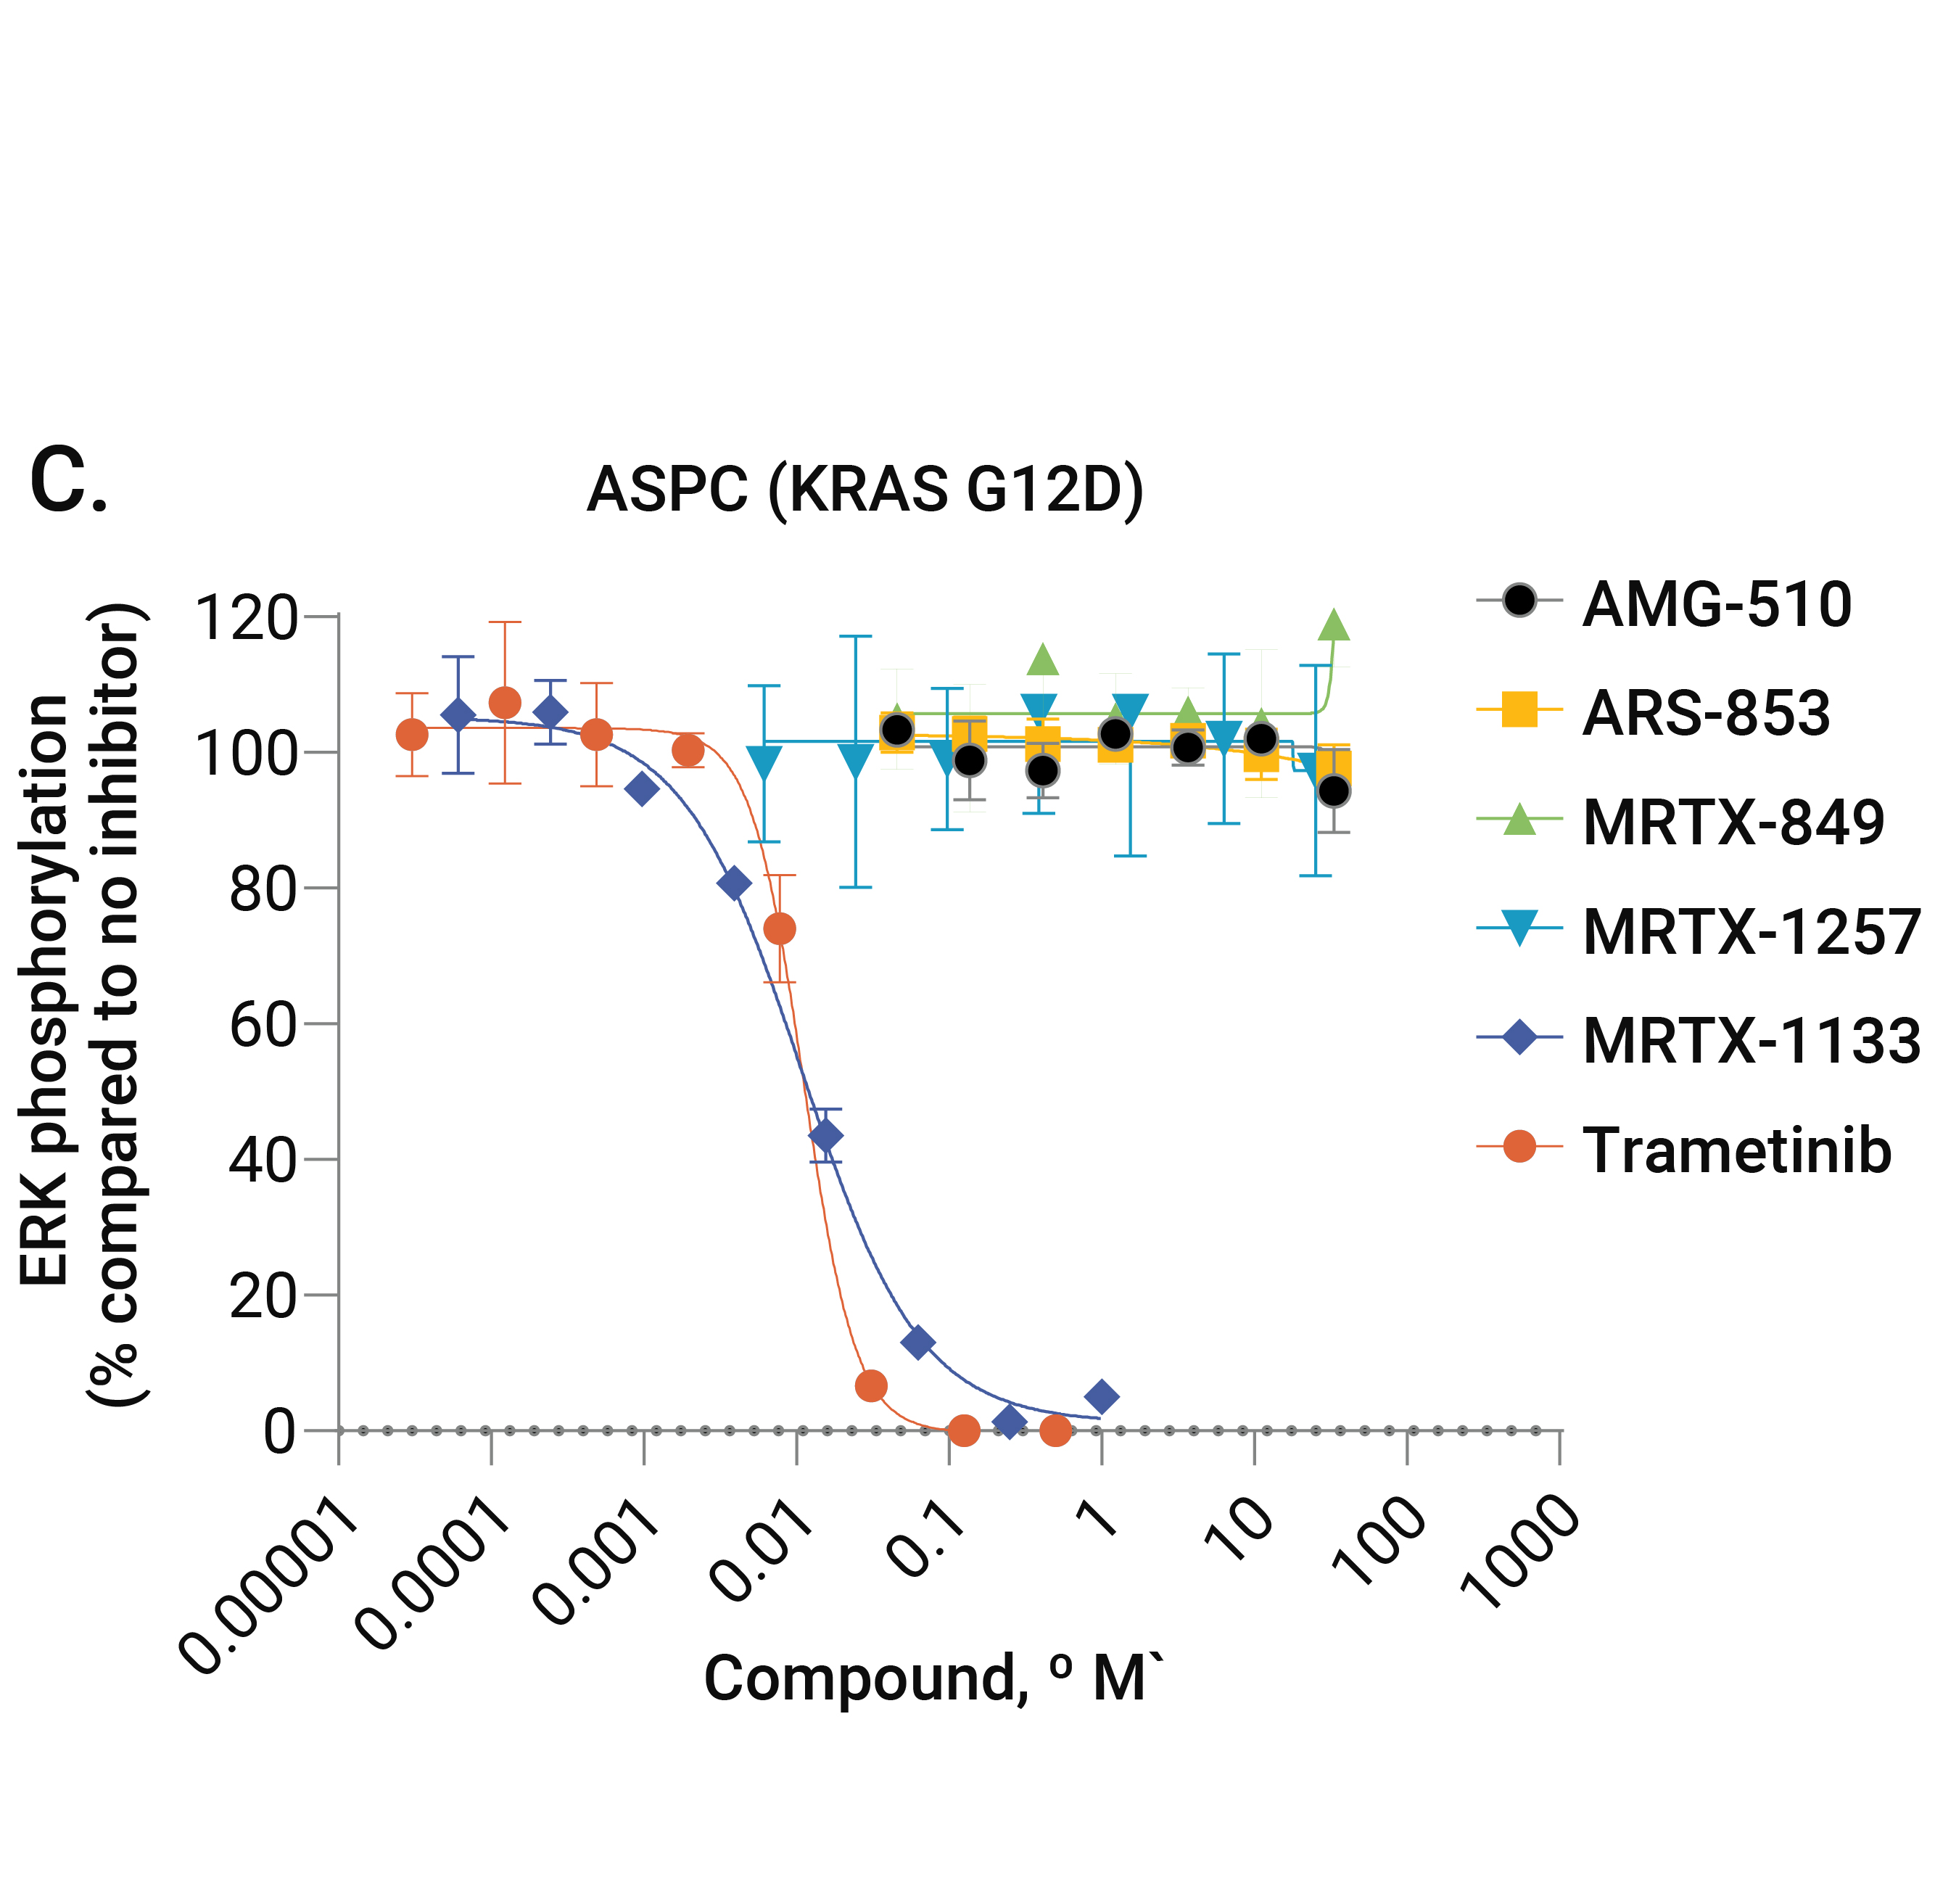 18339ma-01-01-Graph showing ranked order of KRAS inhibitors for pERK expression inhibition in ASPC (KRAS G12D mutant) cells where MRTX-1133 (G12D) shows strong inhibition.